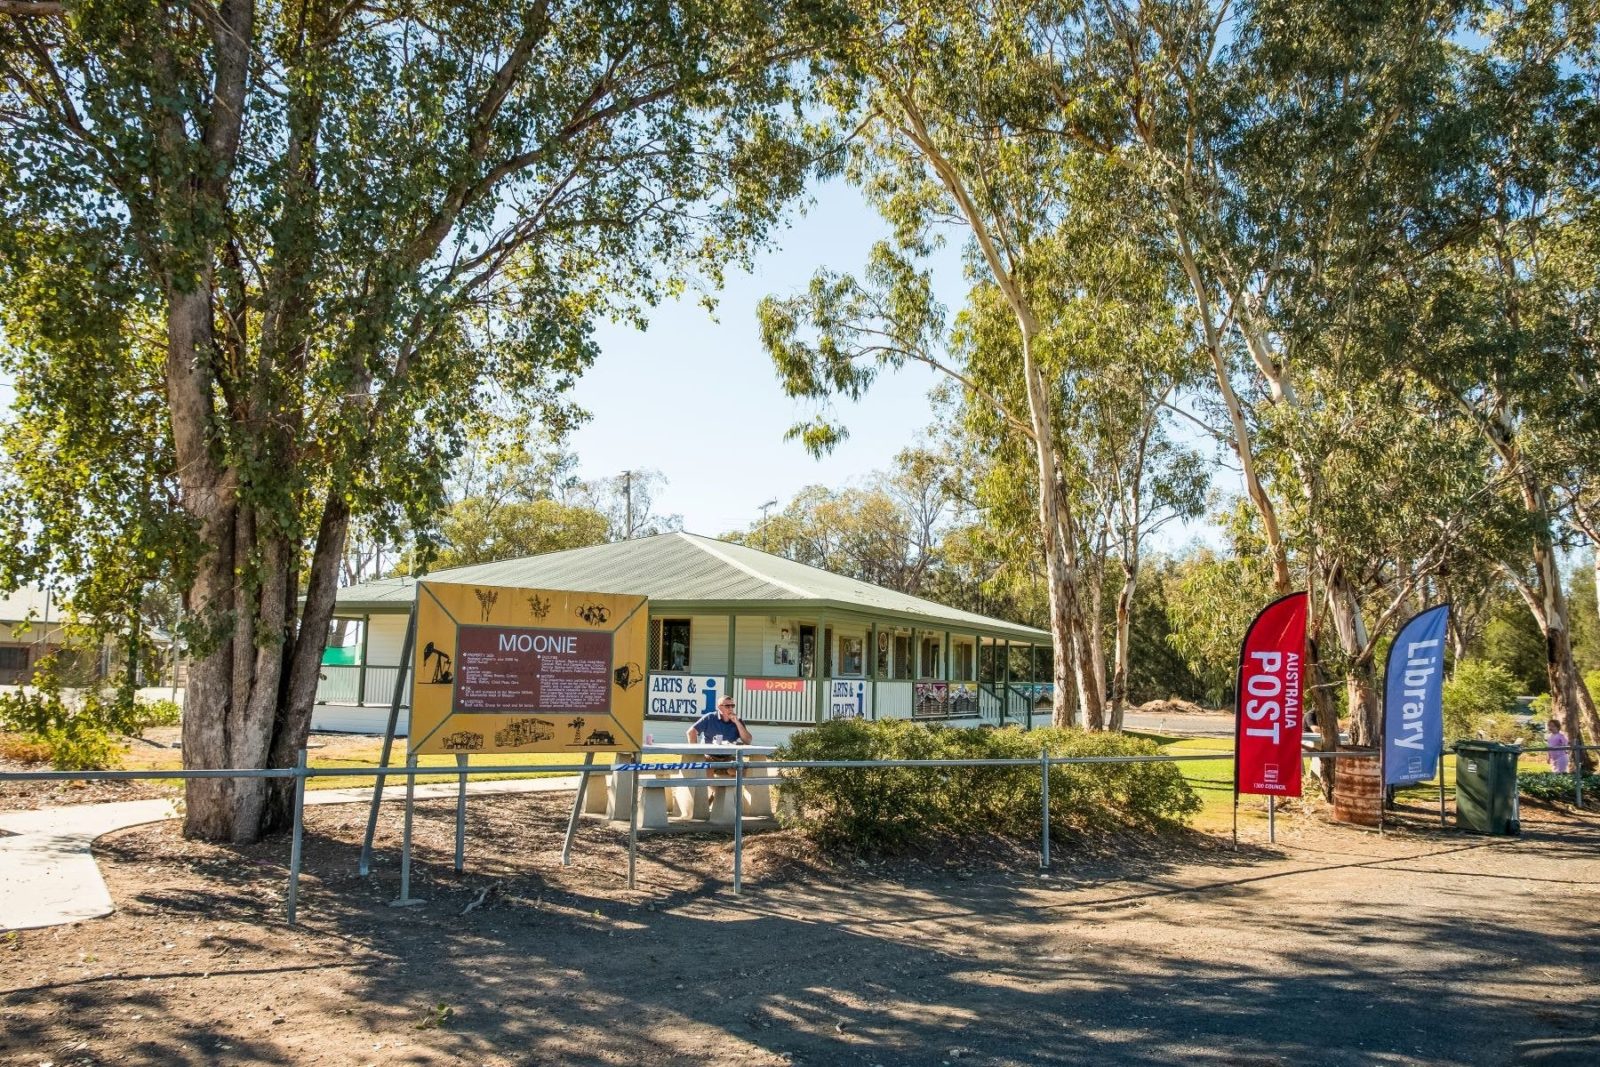 Information Centre and local Arts and Crafts.